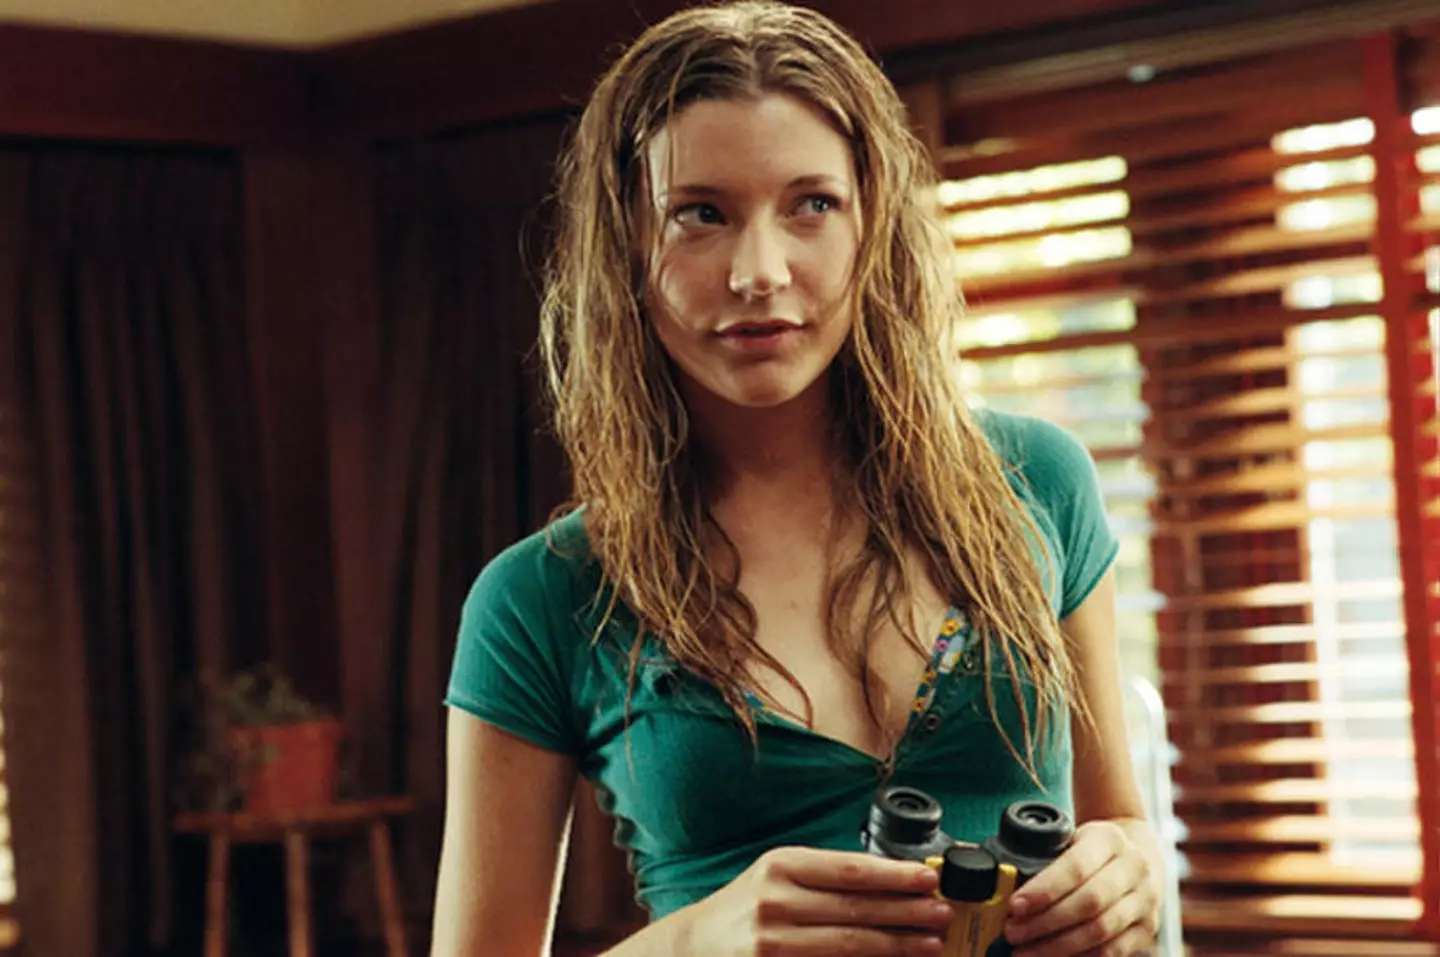 Sarah Roemer as Ashley in Disturbia. (Paramount Pictures)